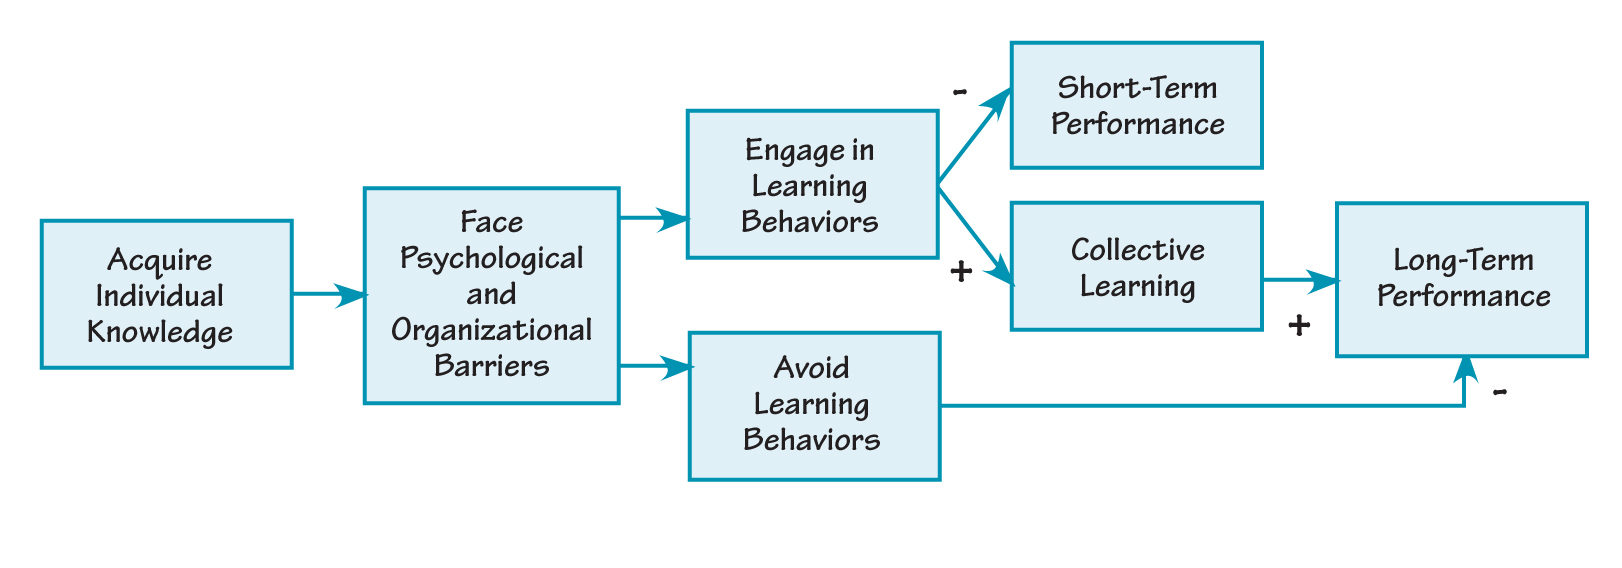 IMPACT OF PSYCHOLOGICAL AND ORGANIZATIONAL BARRIERS TO LEARNING